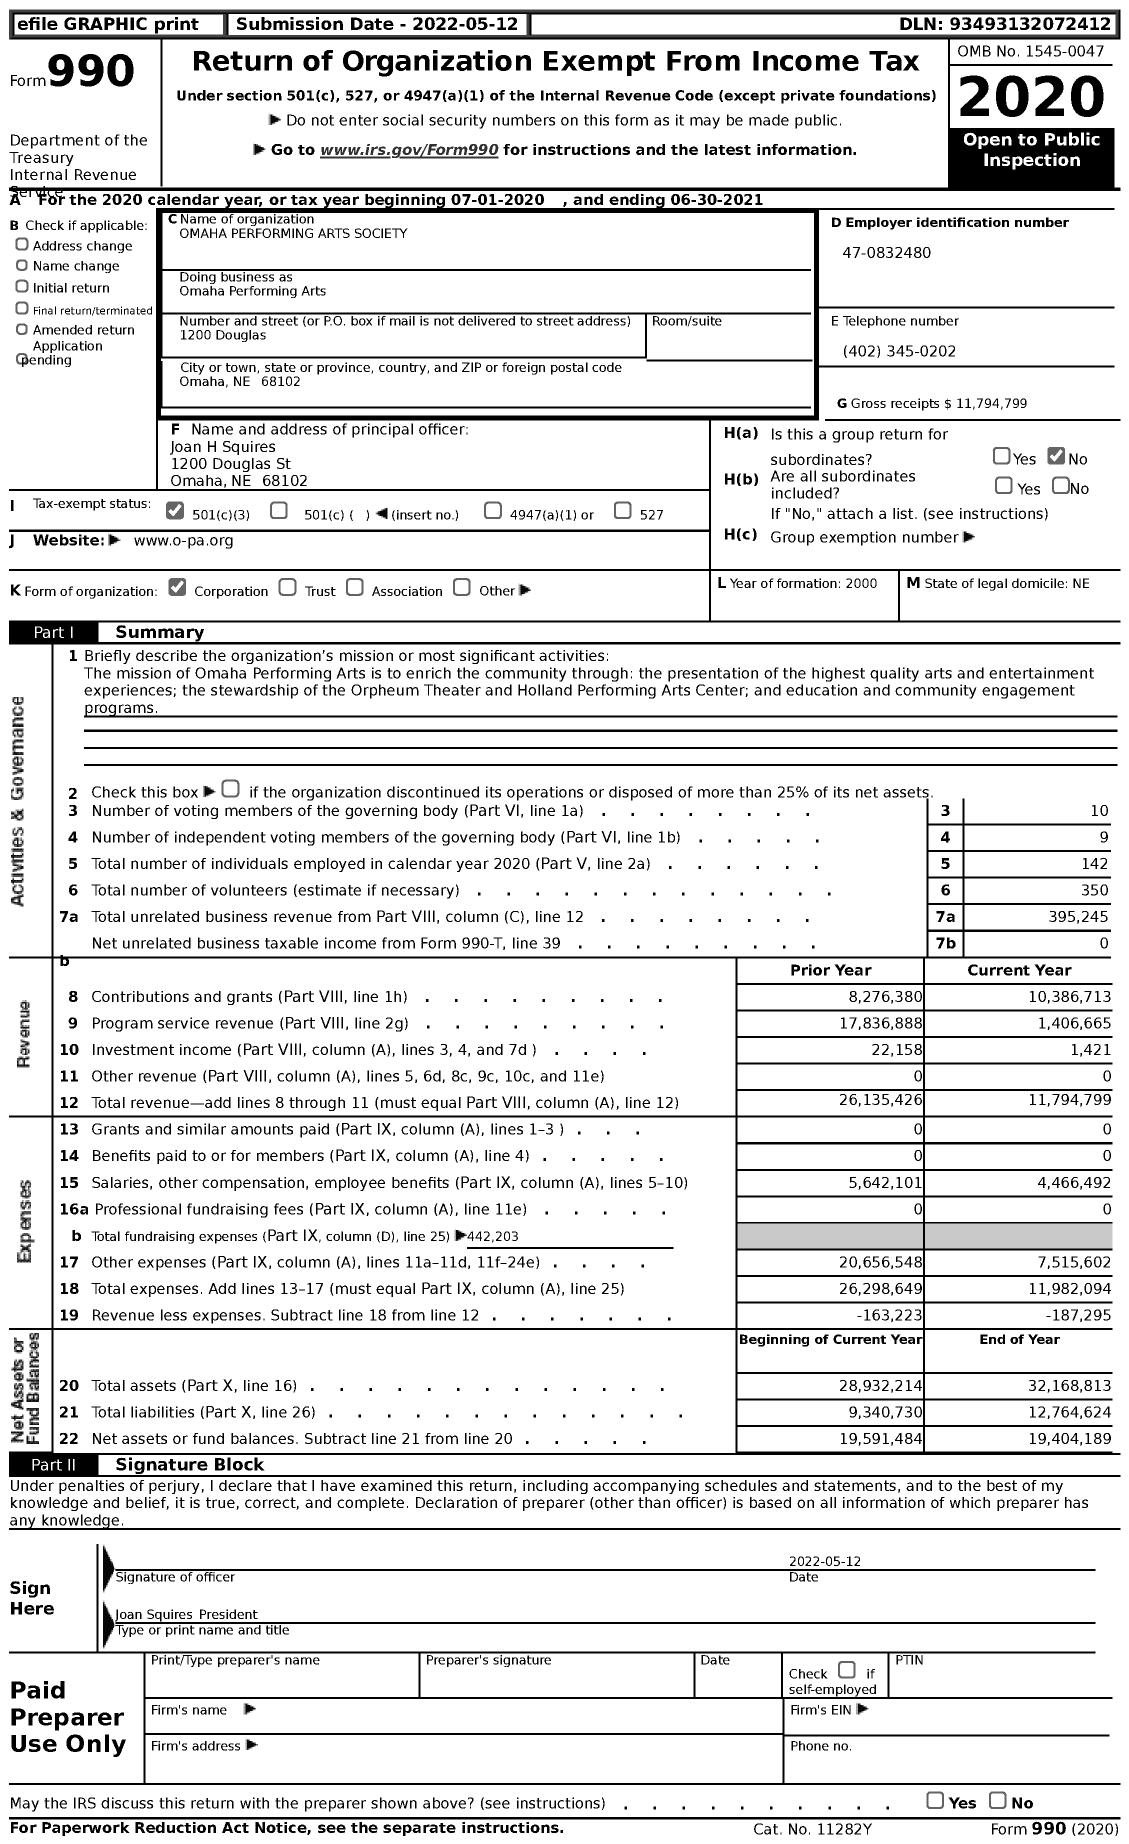 Image of first page of 2020 Form 990 for Omaha Performing Arts (OPAS)